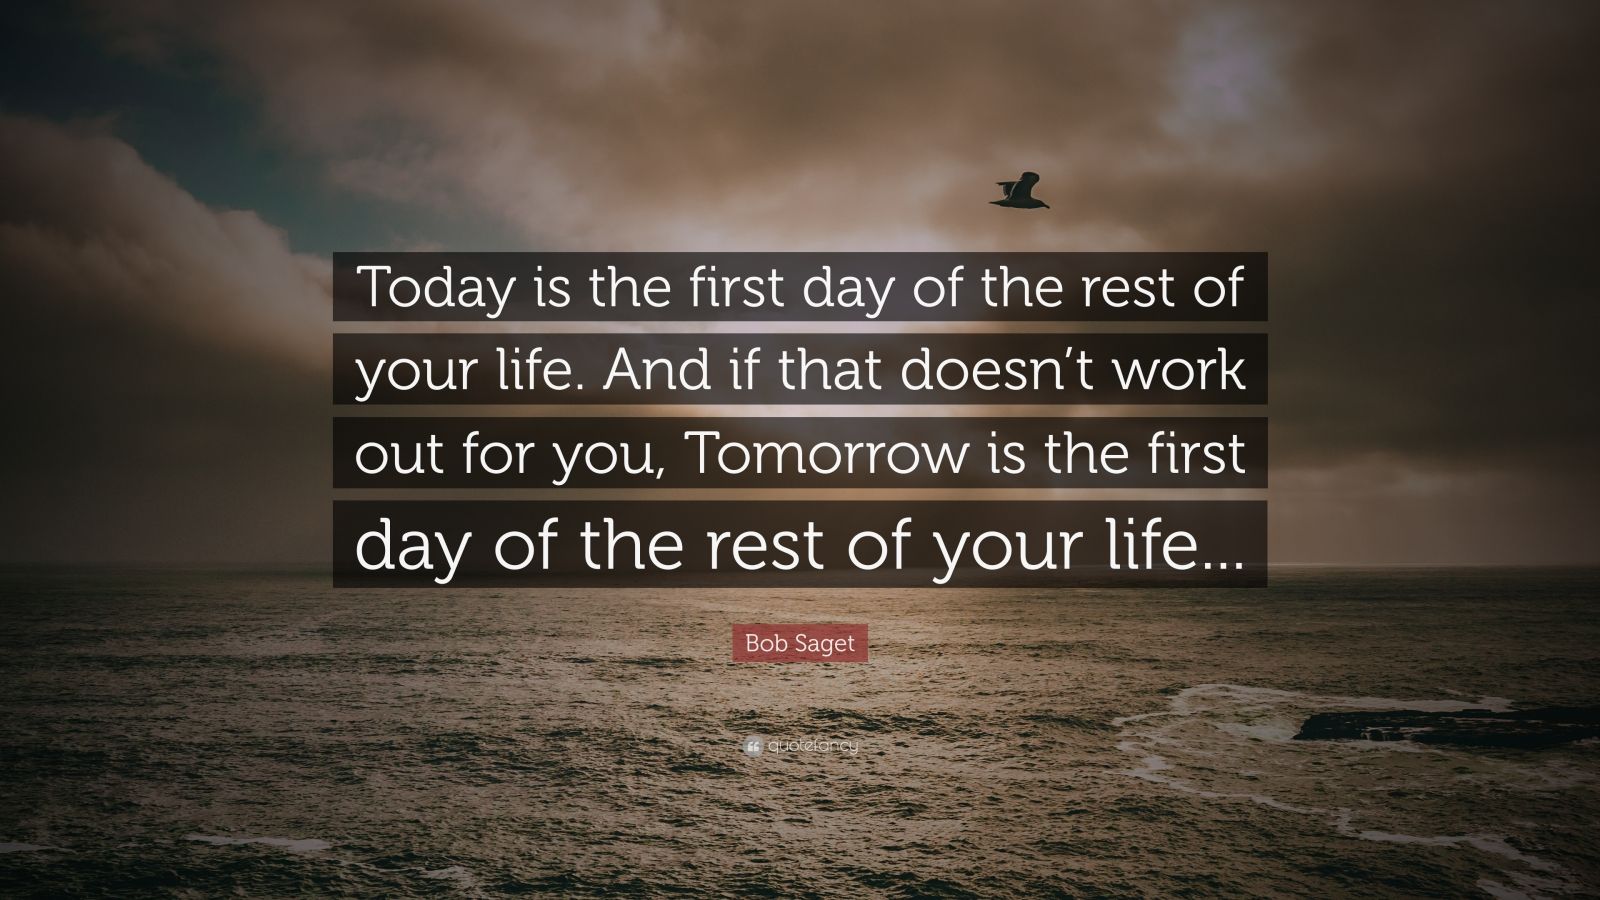 Bob Saget Quote: “Today is the first day of the rest of your life. And ...